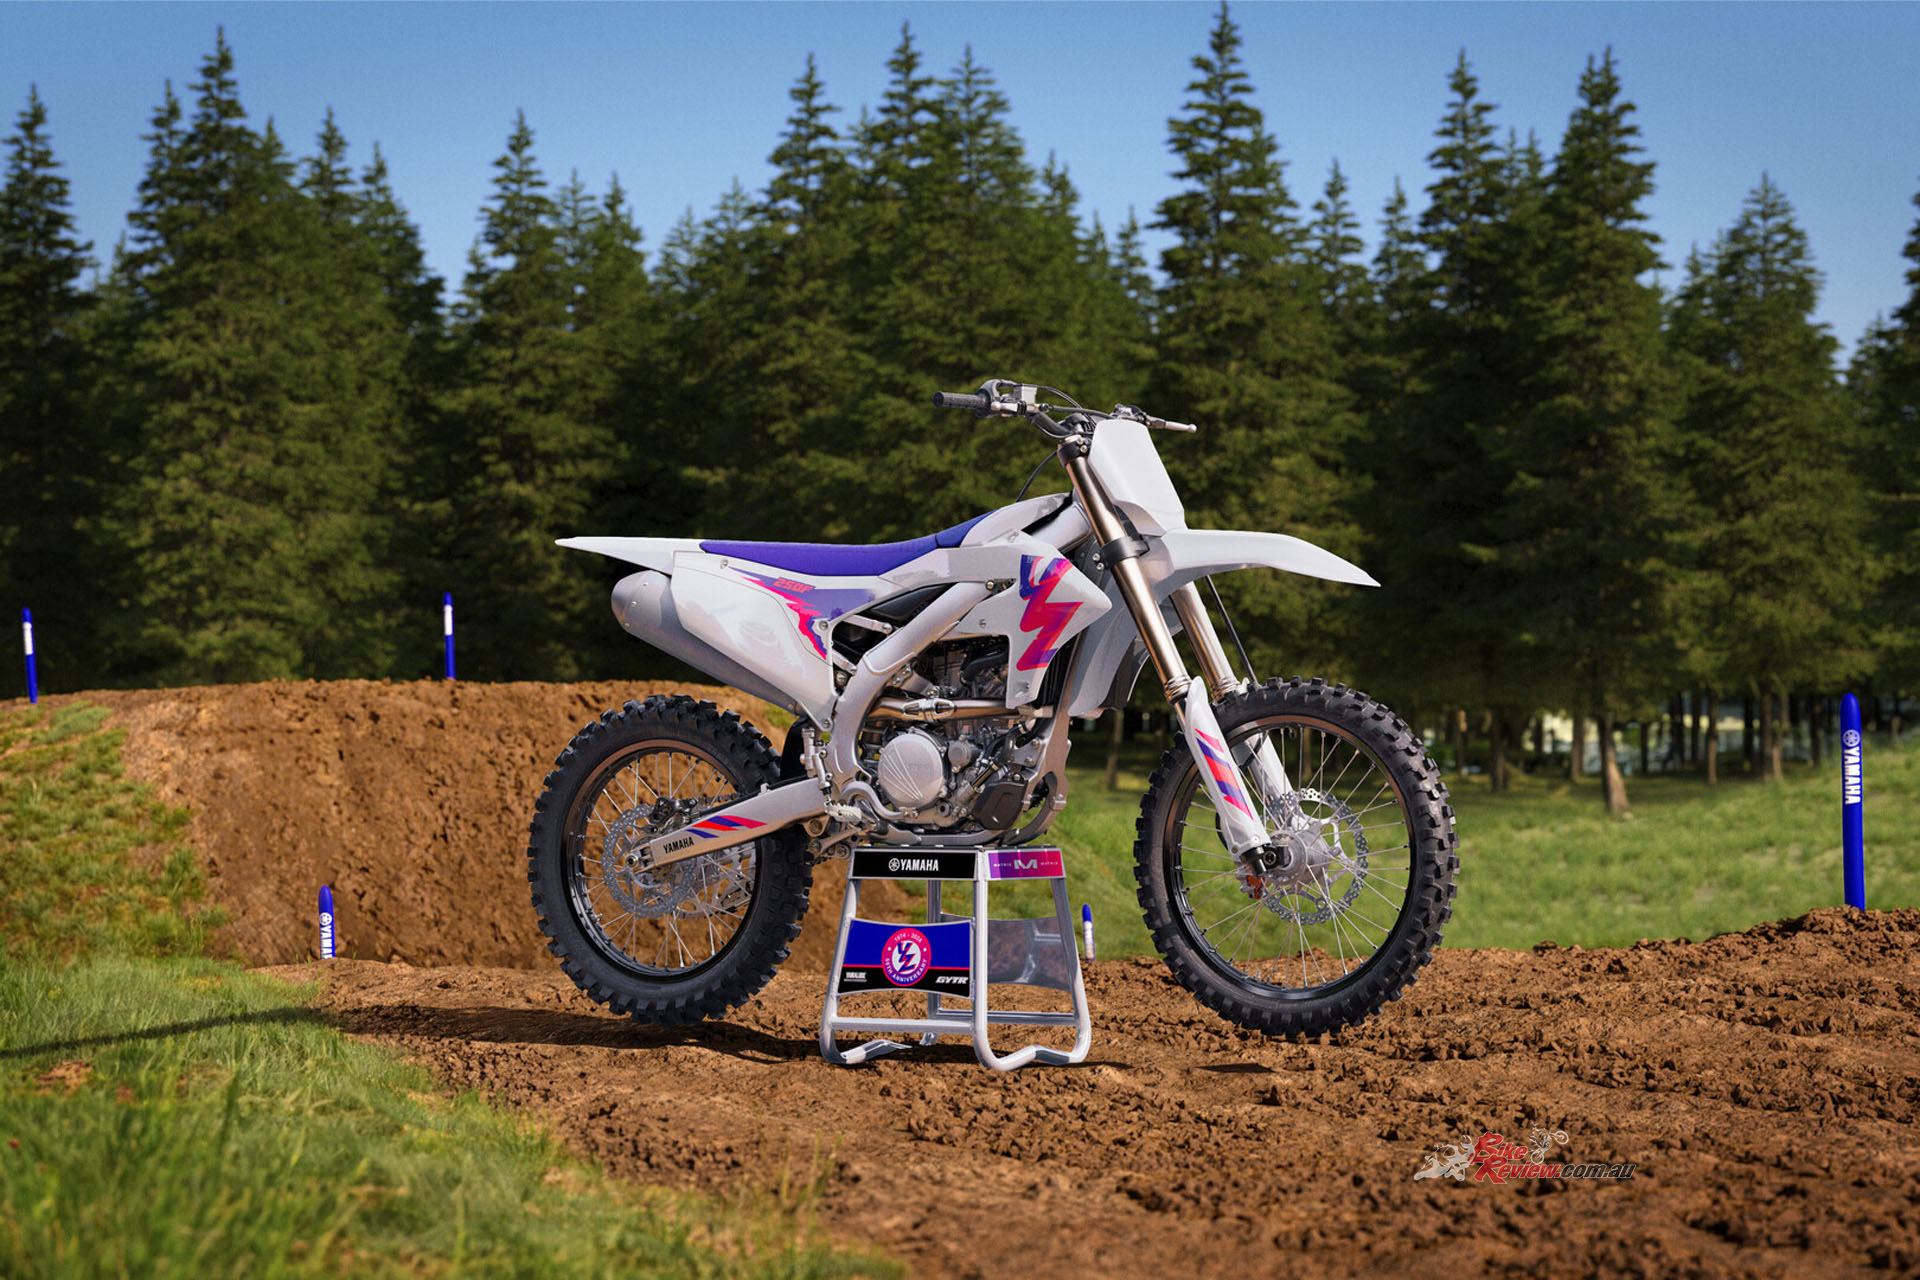 This model draws its inspiration from 1990s-era Yamaha two-stroke motocrossers to honour 50 years of Yamaha offroad innovation.